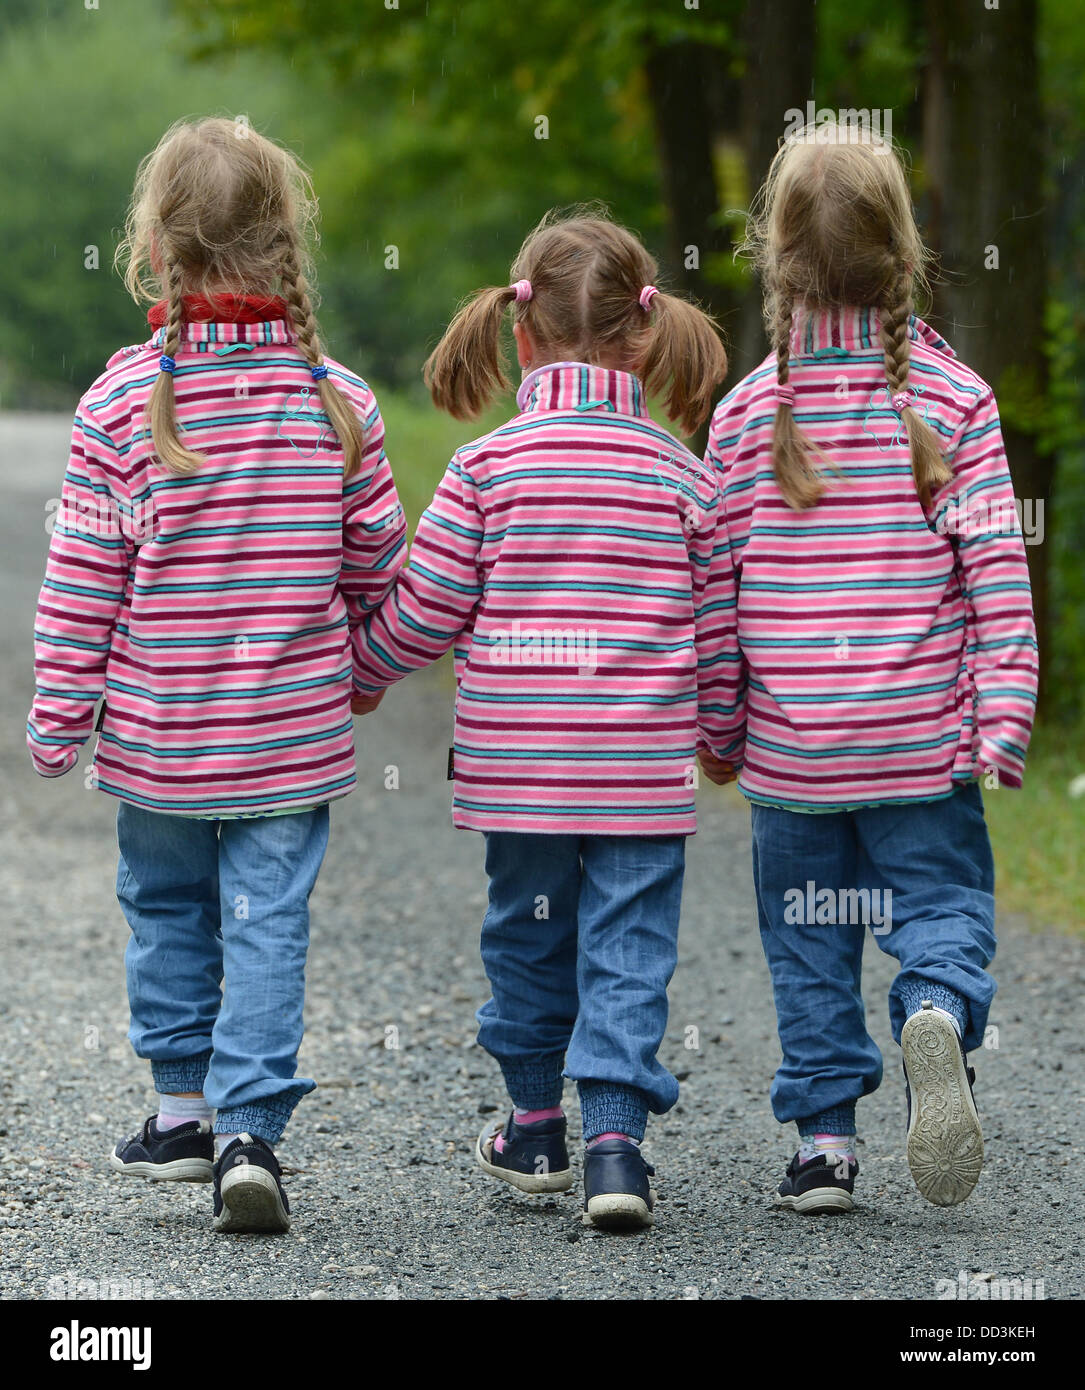 The triplets Leni (L-R, 5), Emely and Nele walk along a street at the Triplet meeting held at Hessen Park on a rainy day in Neu-Anspach, Germany, 25 August 2013. The governor of Hesse is a godfather for all children of multiple births and hosts an event each year for them. Photo: ARNE DEDERT Stock Photo